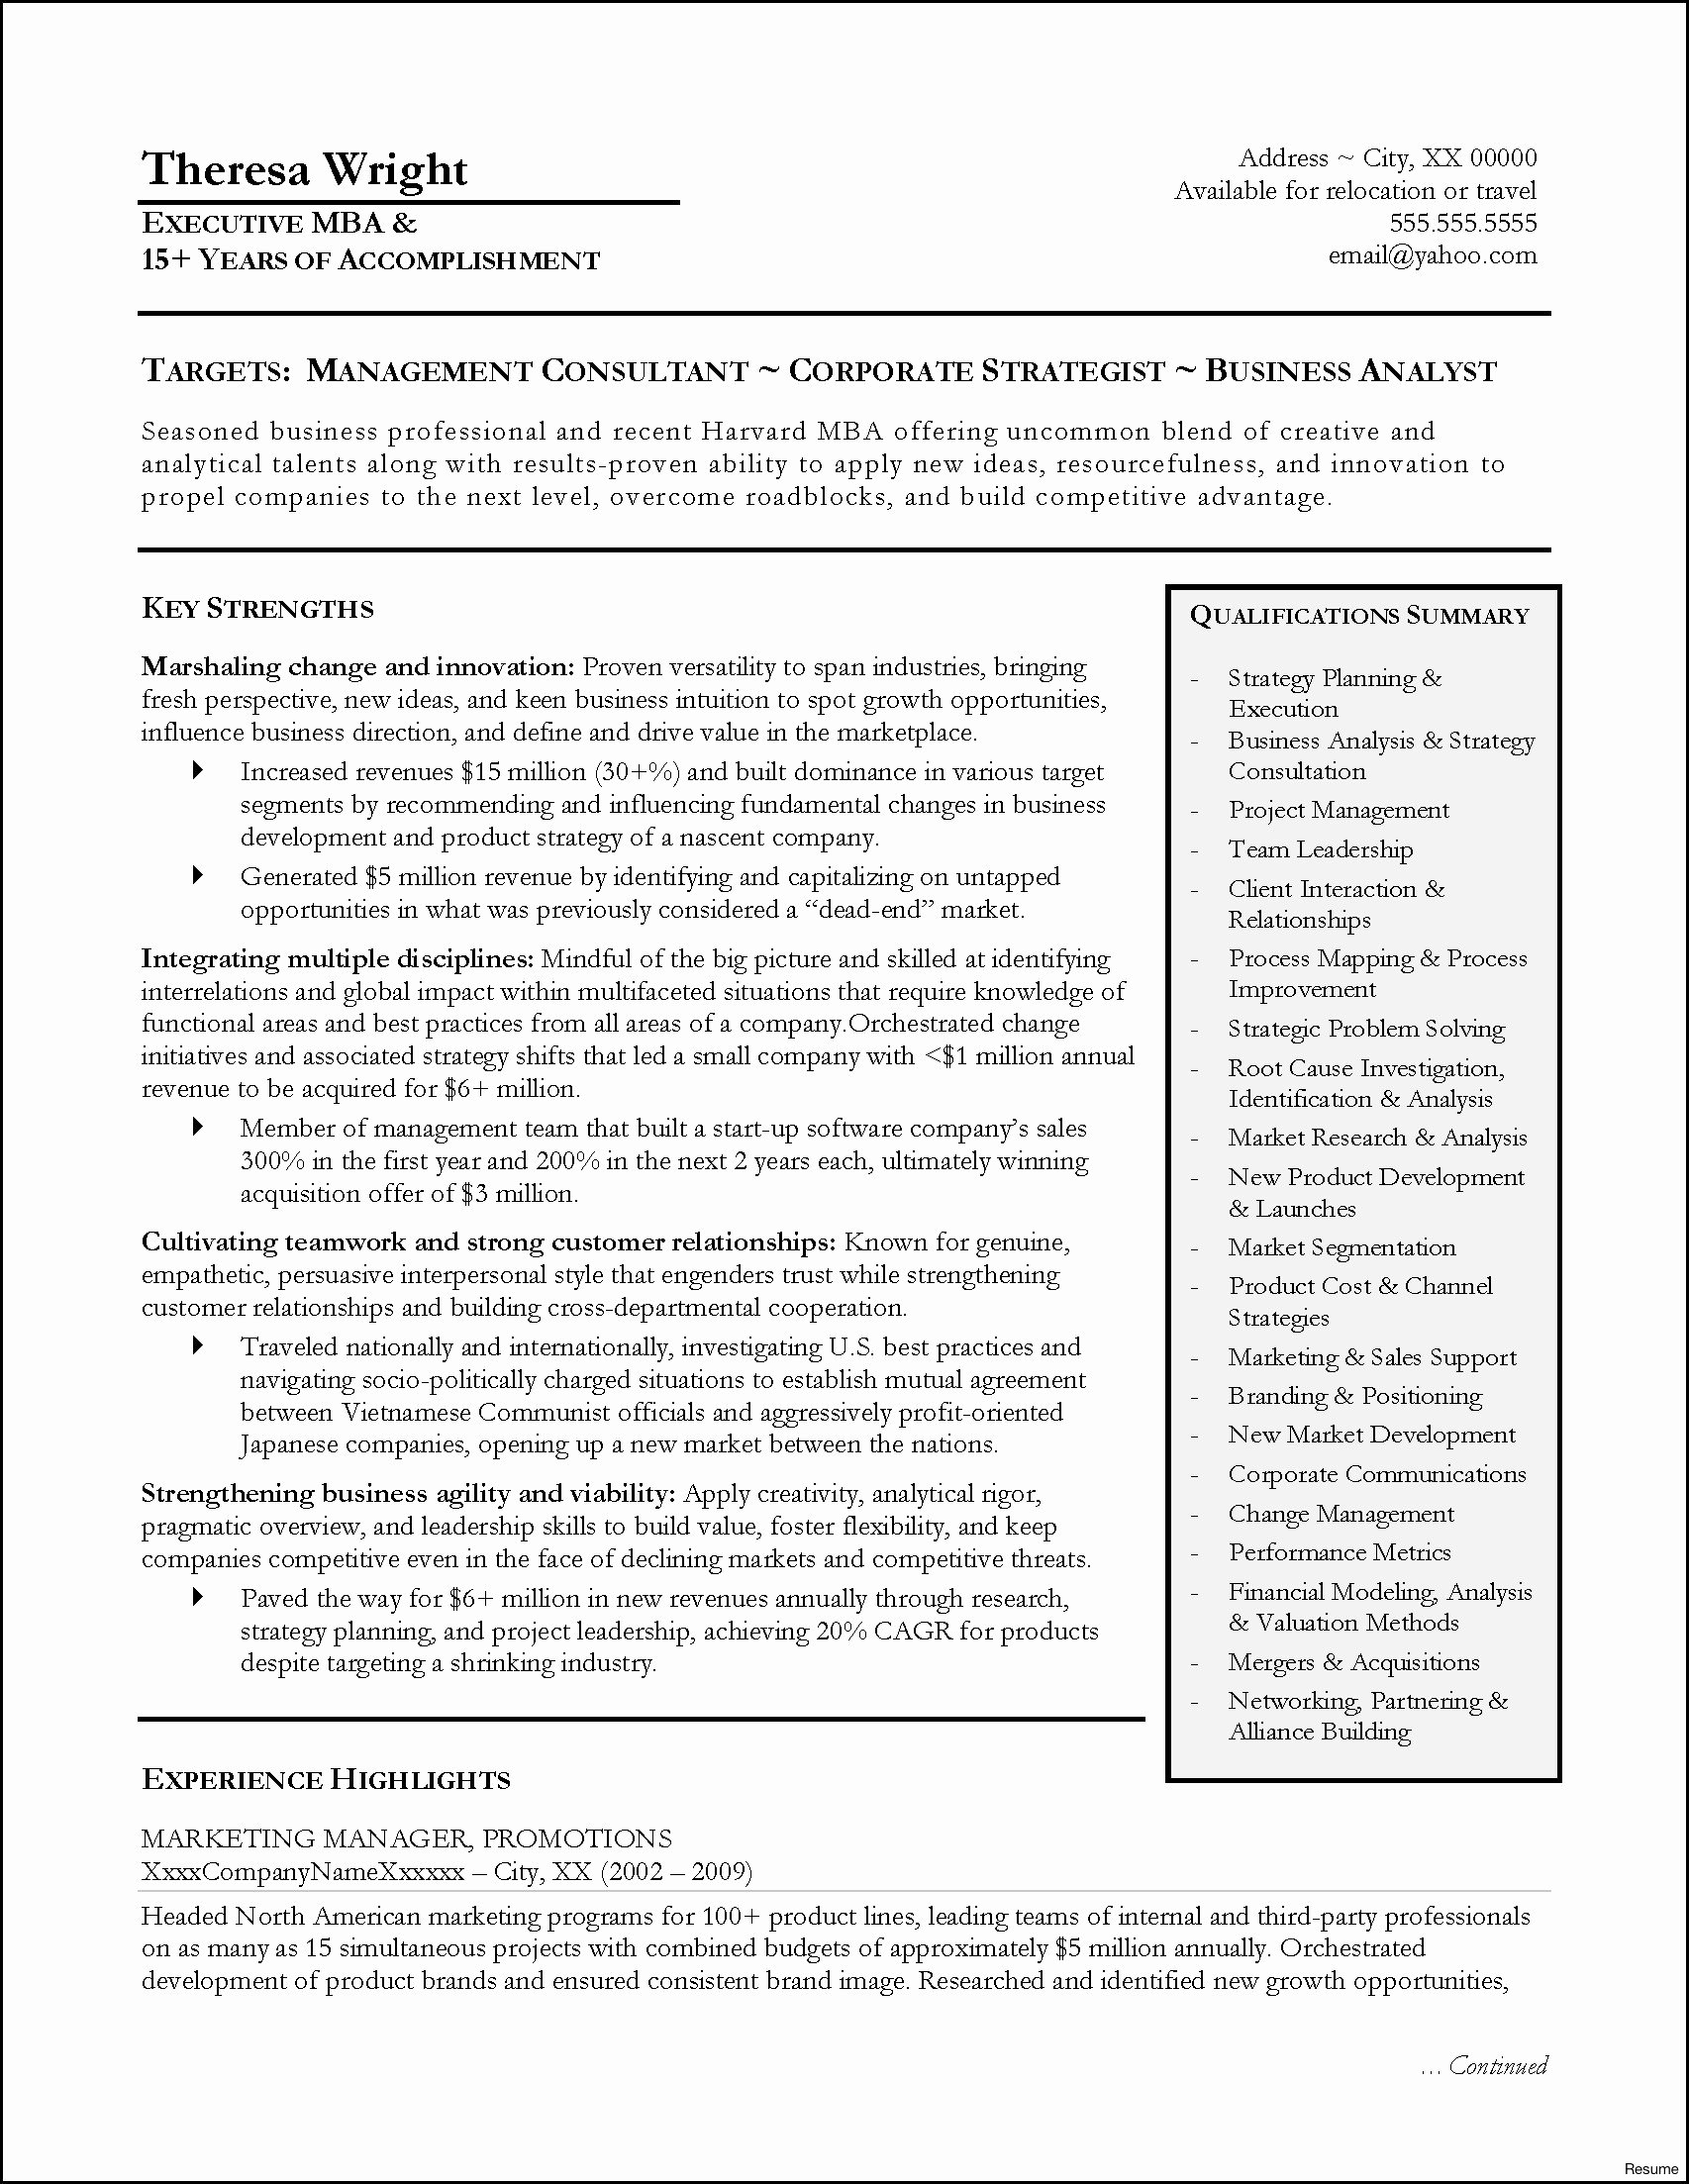 Resume for Mba Application Awesome Mba Resume Examples